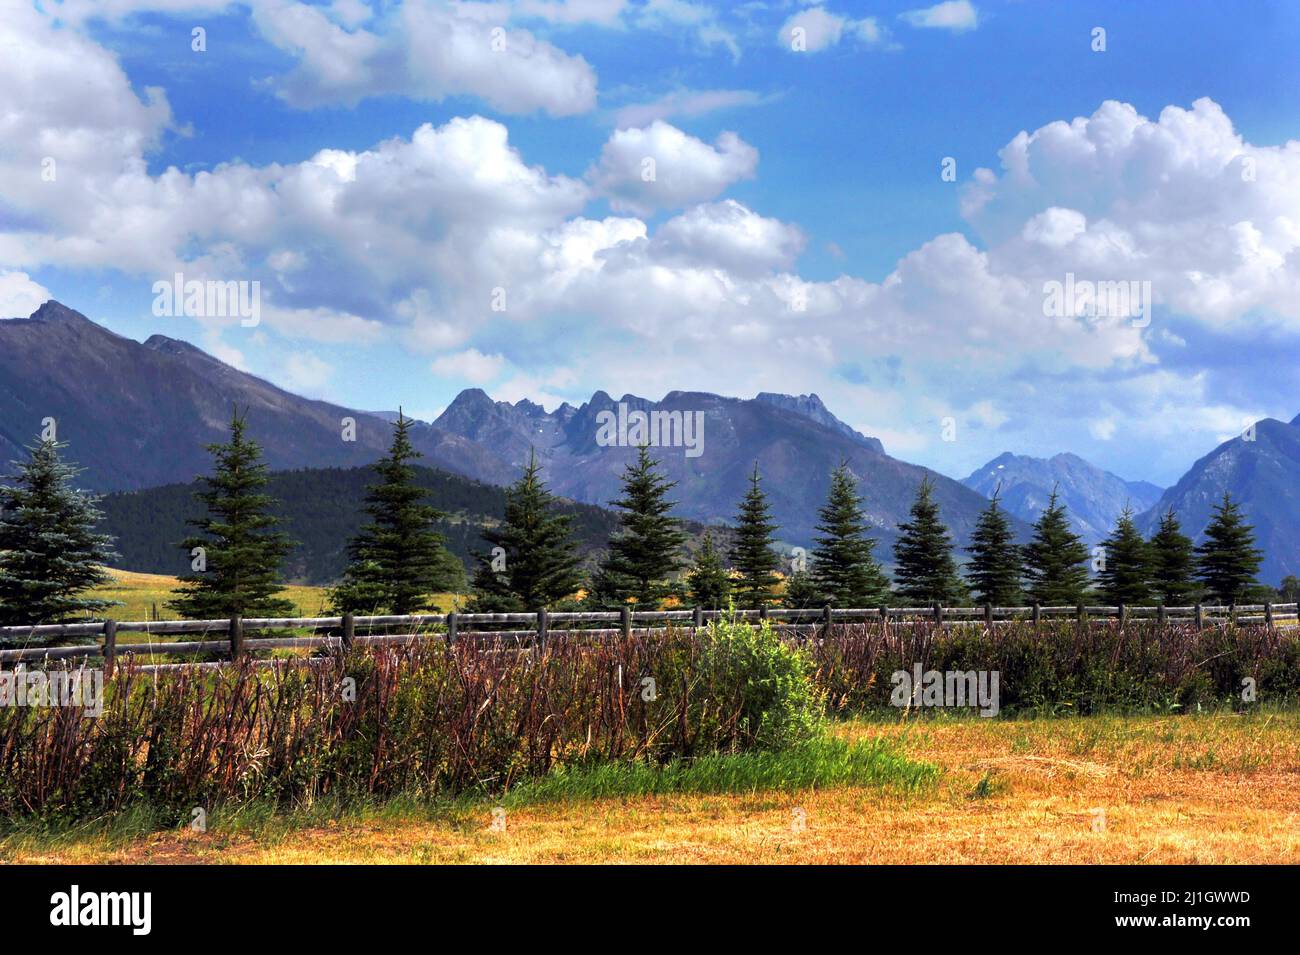 Rustic, wooden fence runs across photo, seperating field from distant, Absaroka mountains in Montana.  Blue sky and fluffy clouds complete image. Stock Photo